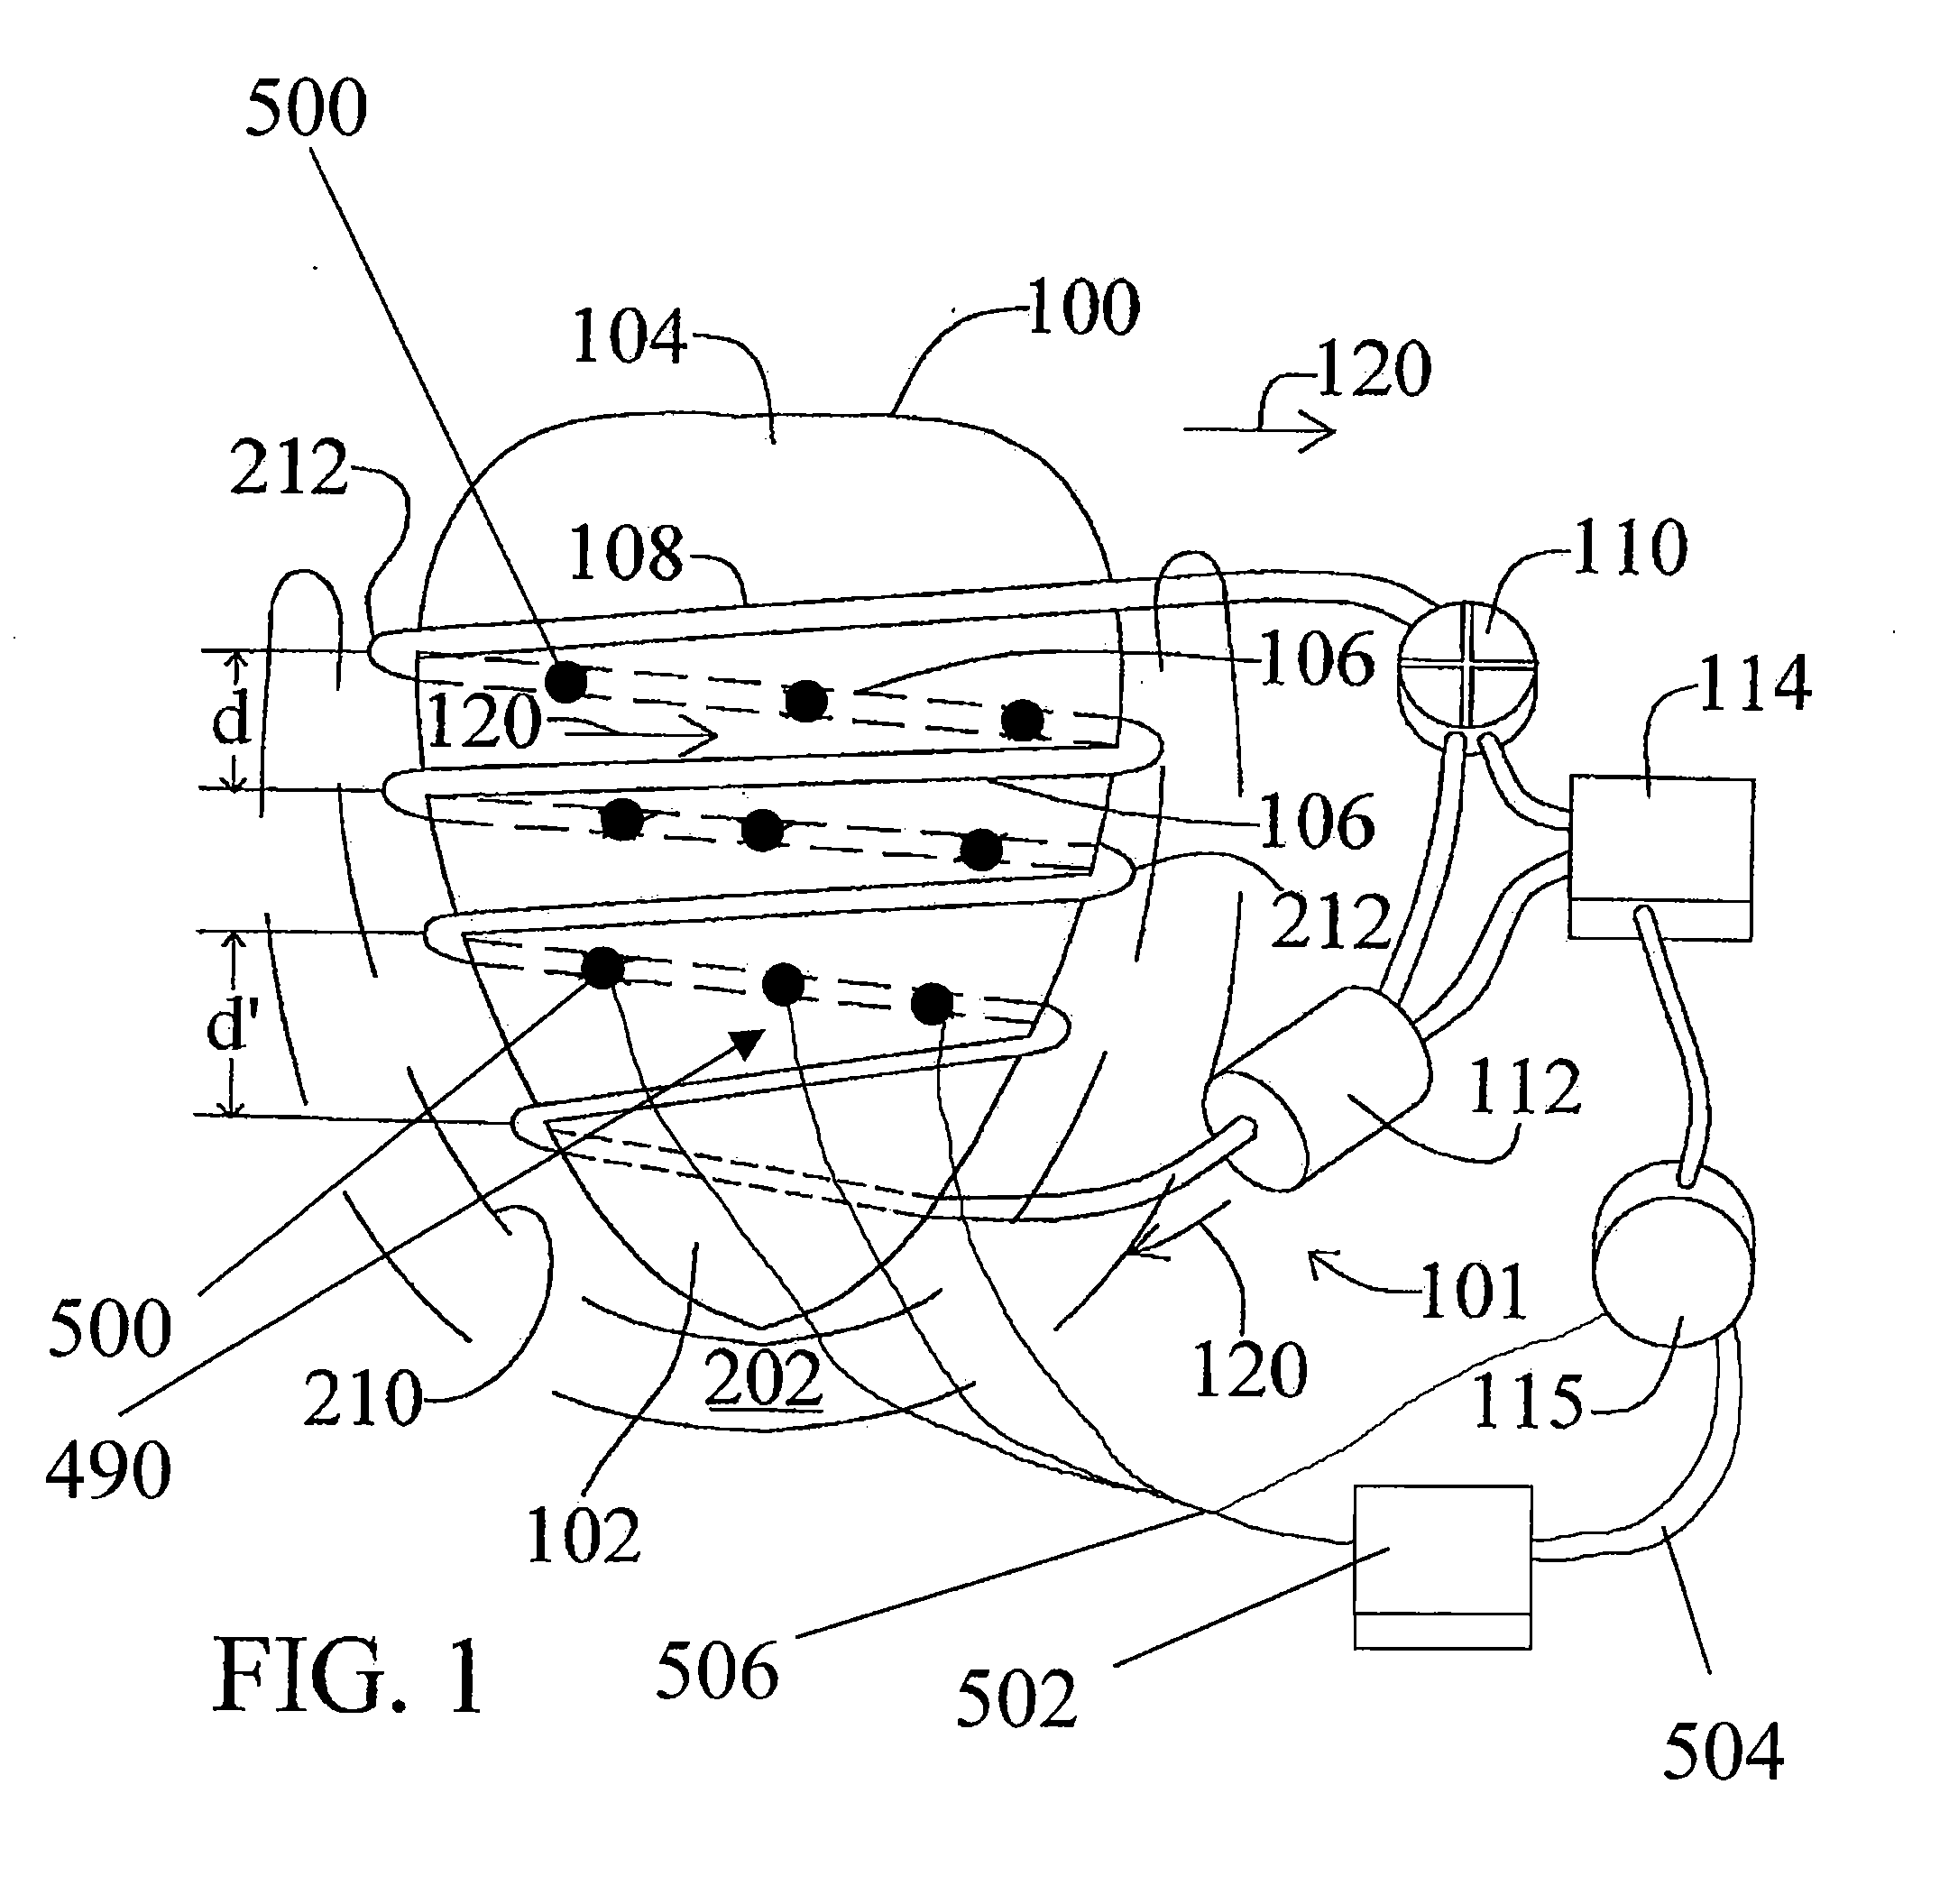 Implantable cardiac assist device with a phased electrode array